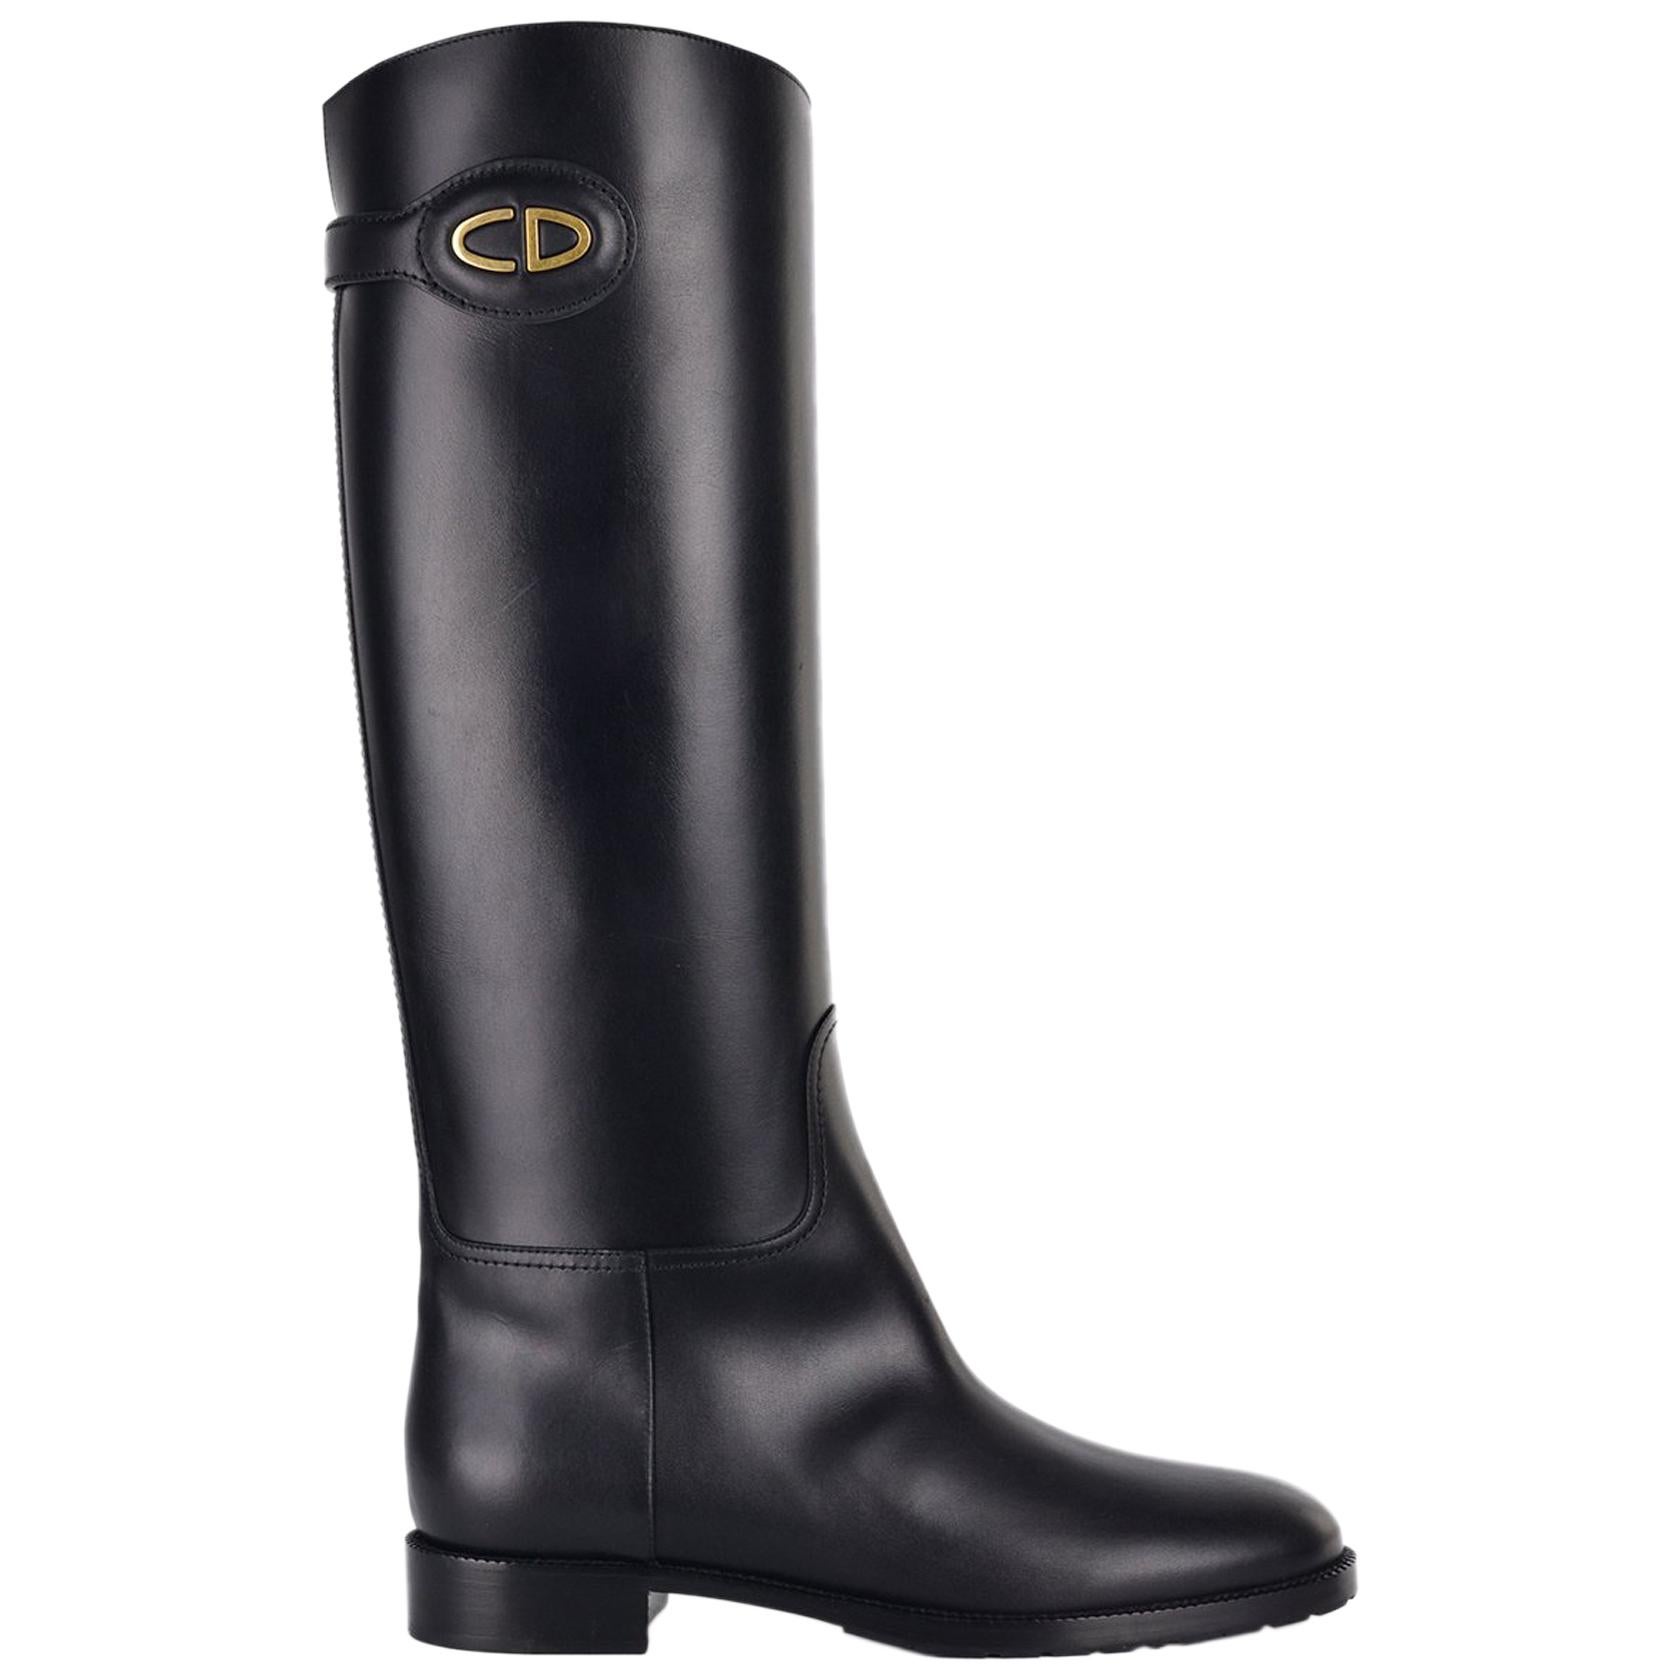 Dior Women's Black Leather Diorable Knee High Boots im Angebot